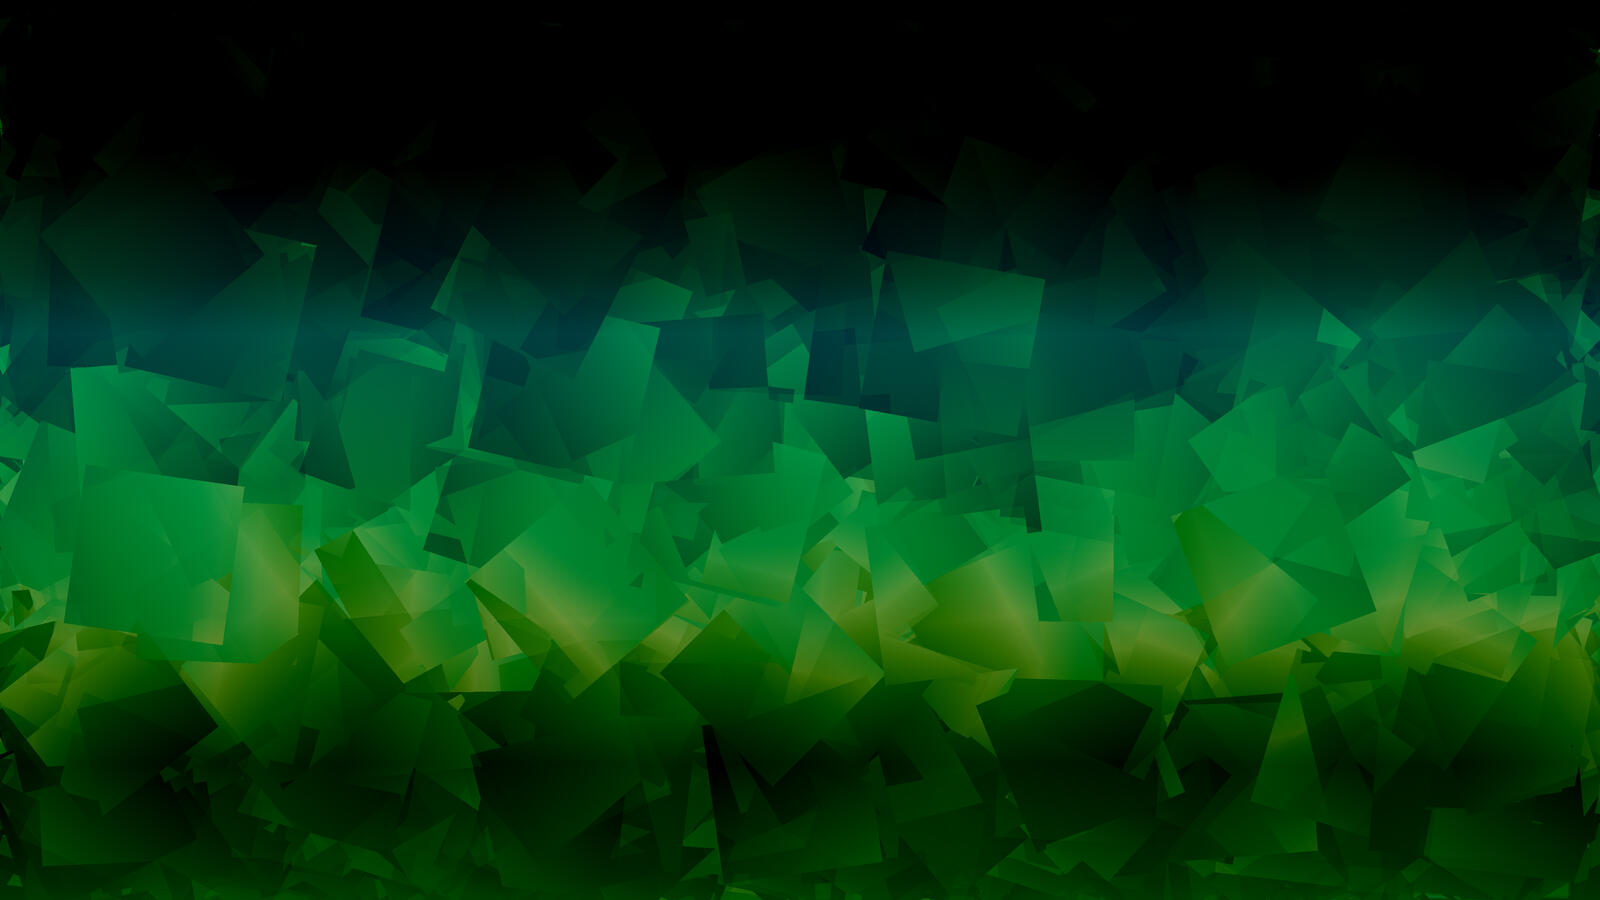 Free photo Green abstraction with an image of rectangular shapes